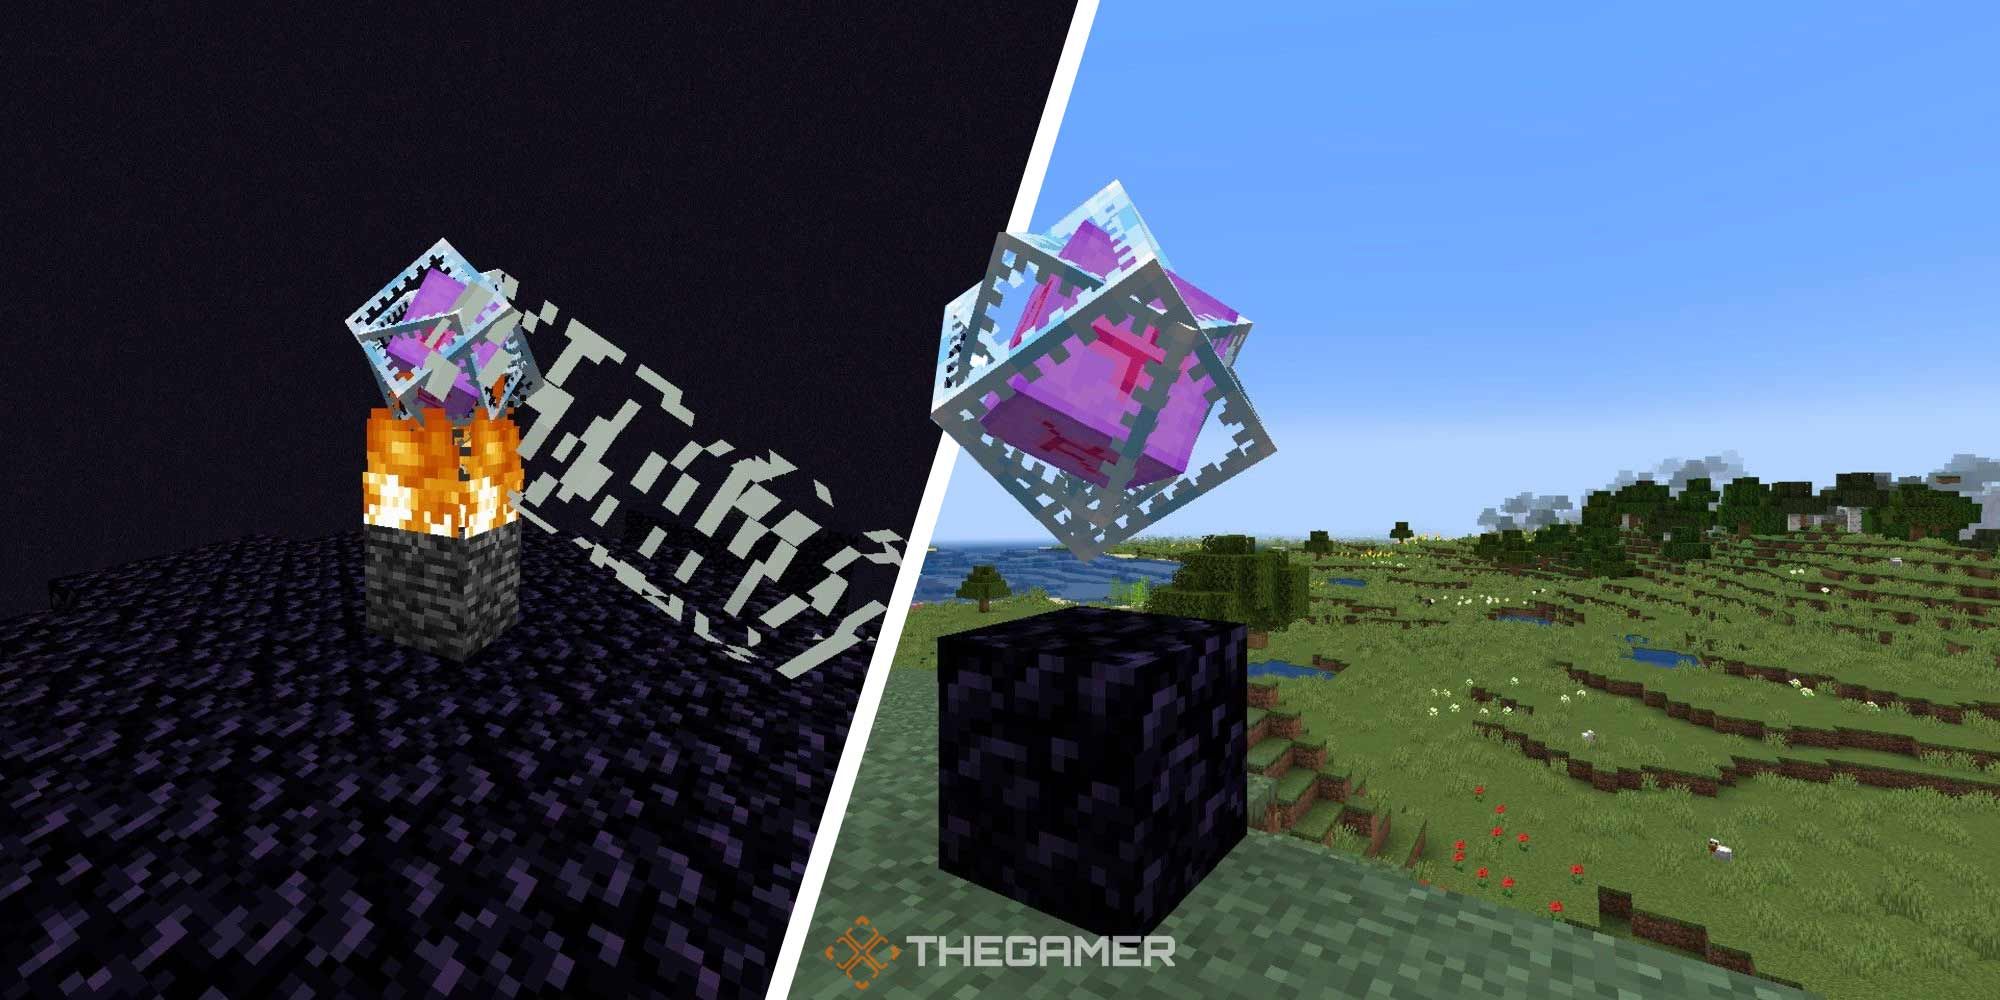 How to get ender pearls from villagers